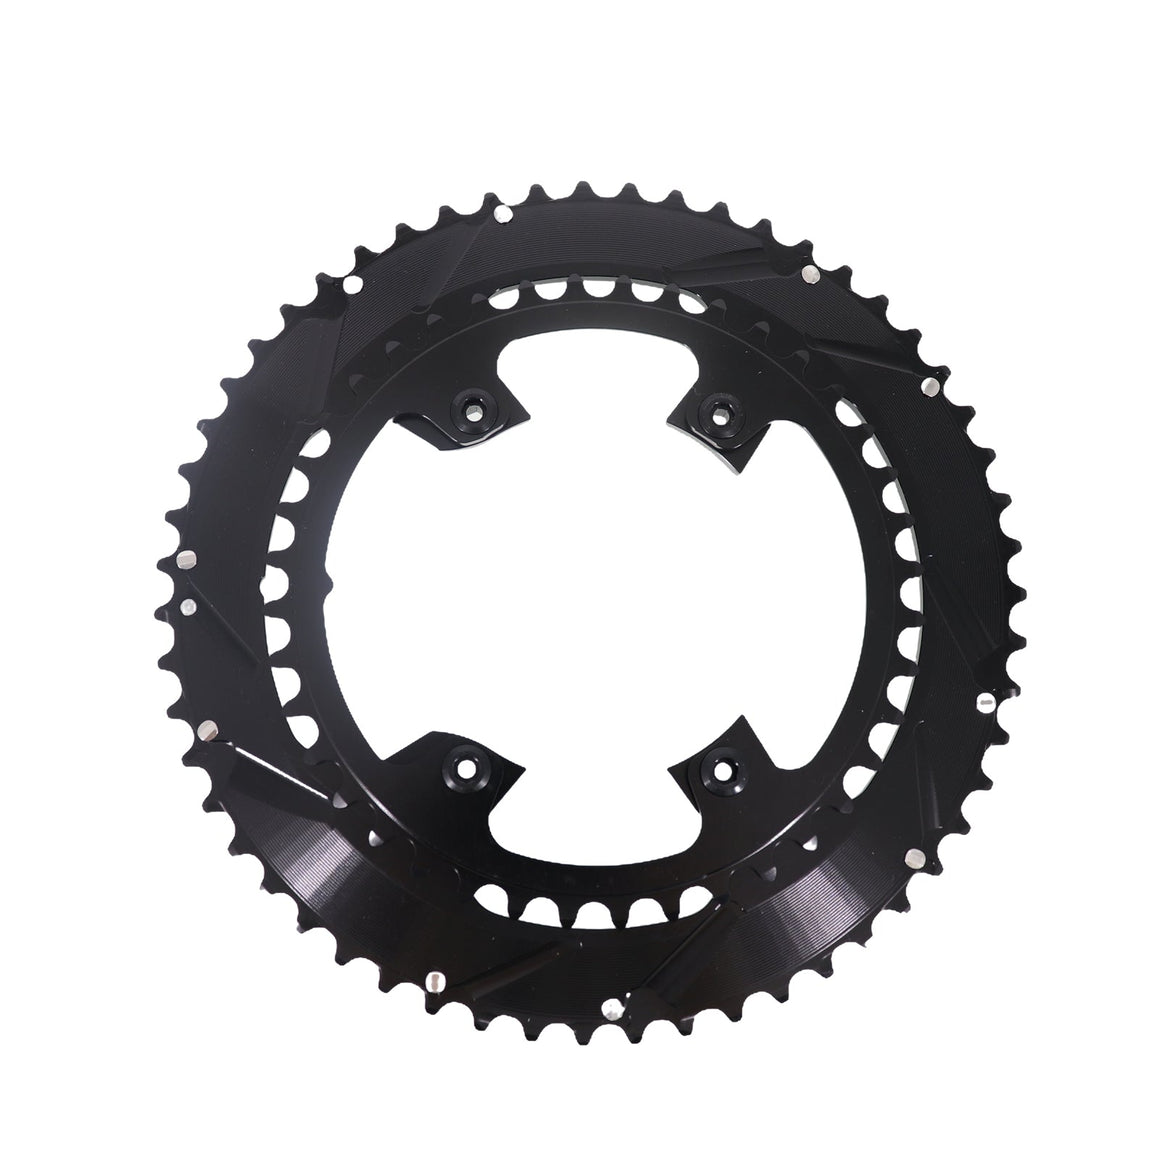 Stone 55/40 12 Speed Chainrings